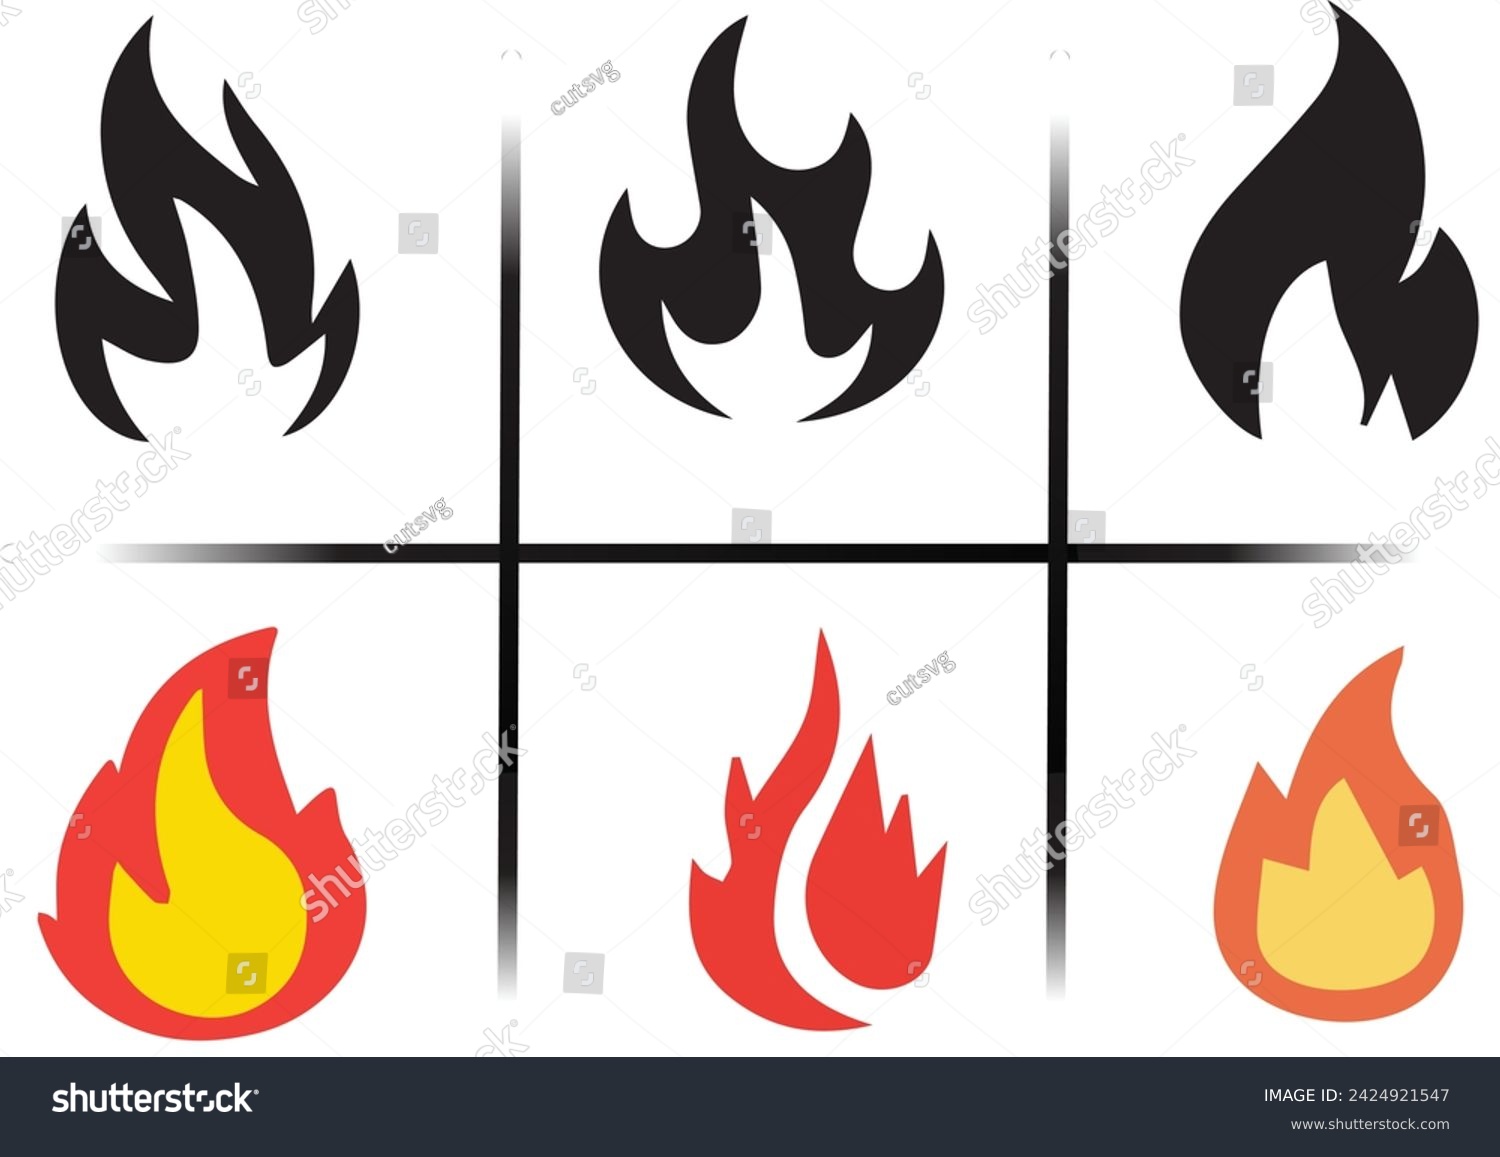 SVG of Fire icon vector set isolated from background. Different dark fire icons in modern flat style svg